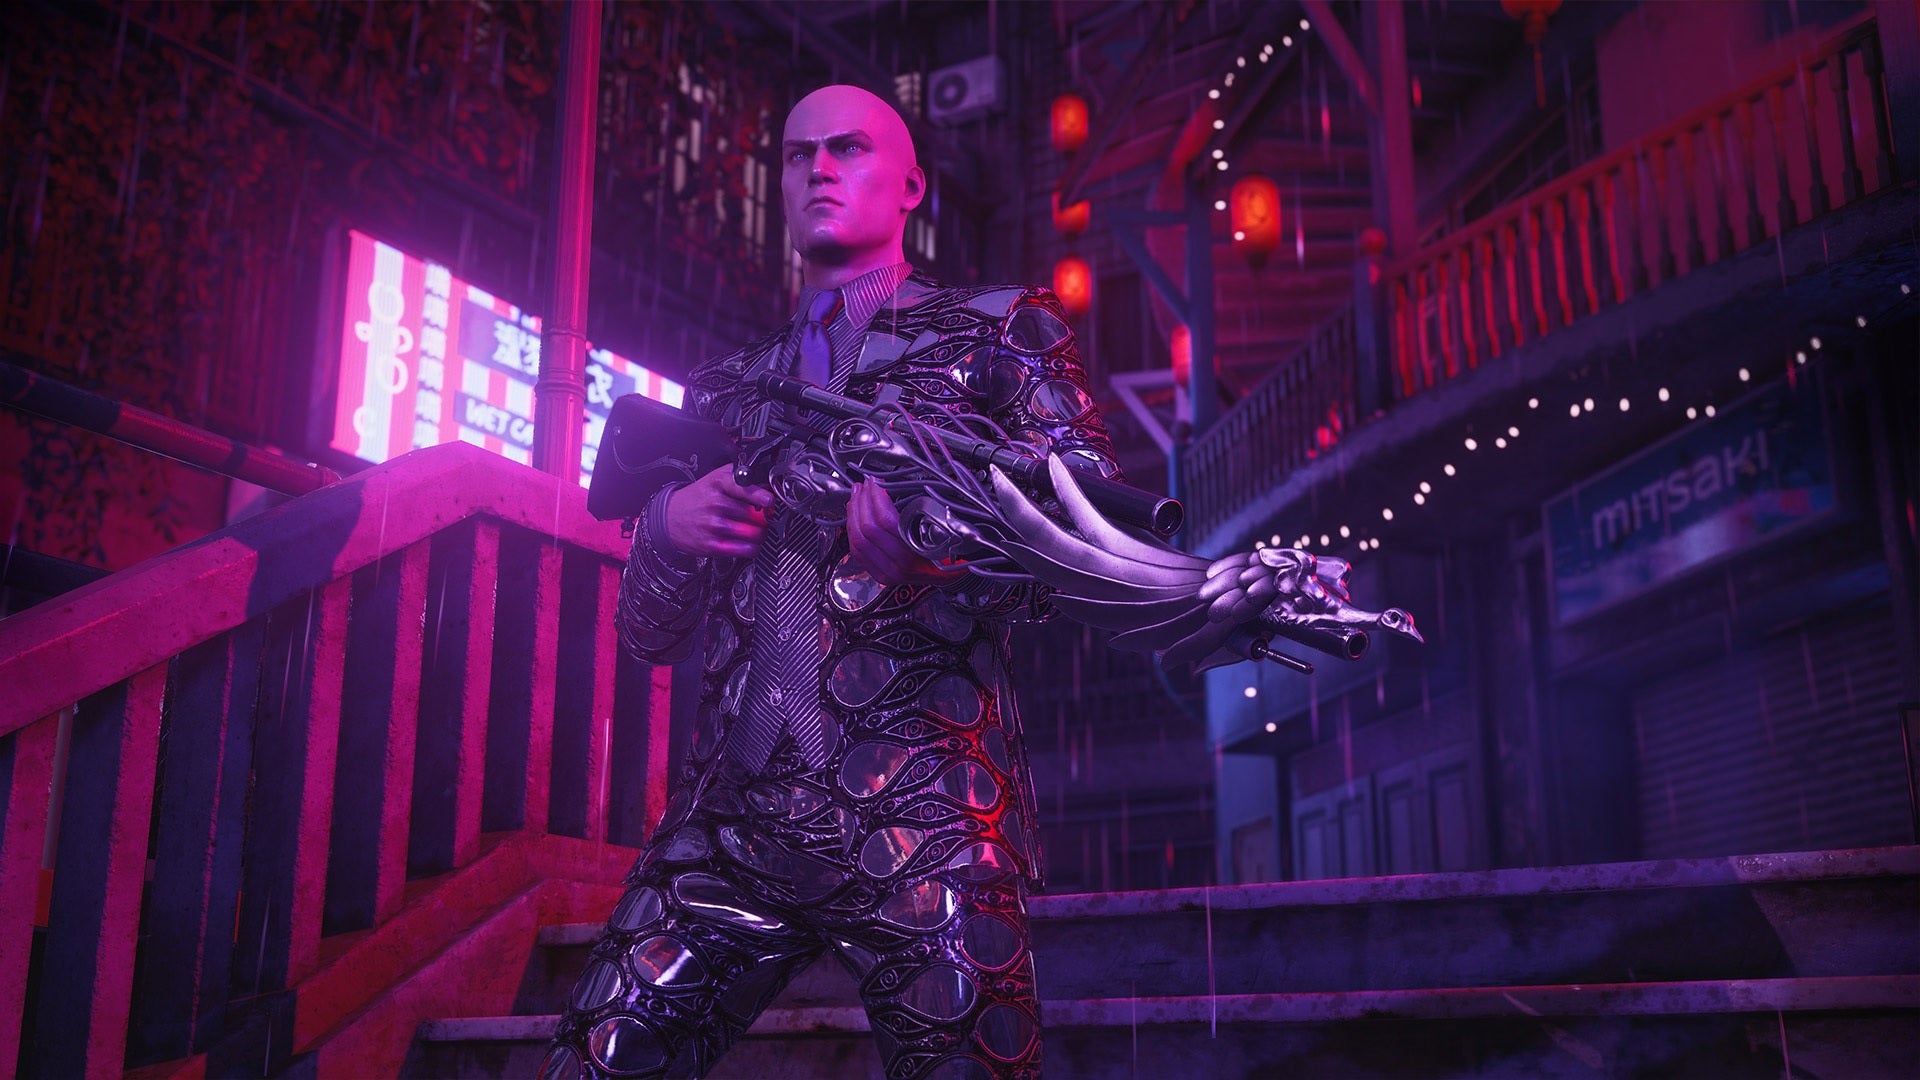 Hitman 3 - Agent 47 walking through Chongqing at night wearing a reflective Pride suit and carrying the DLC pride-themed gun.